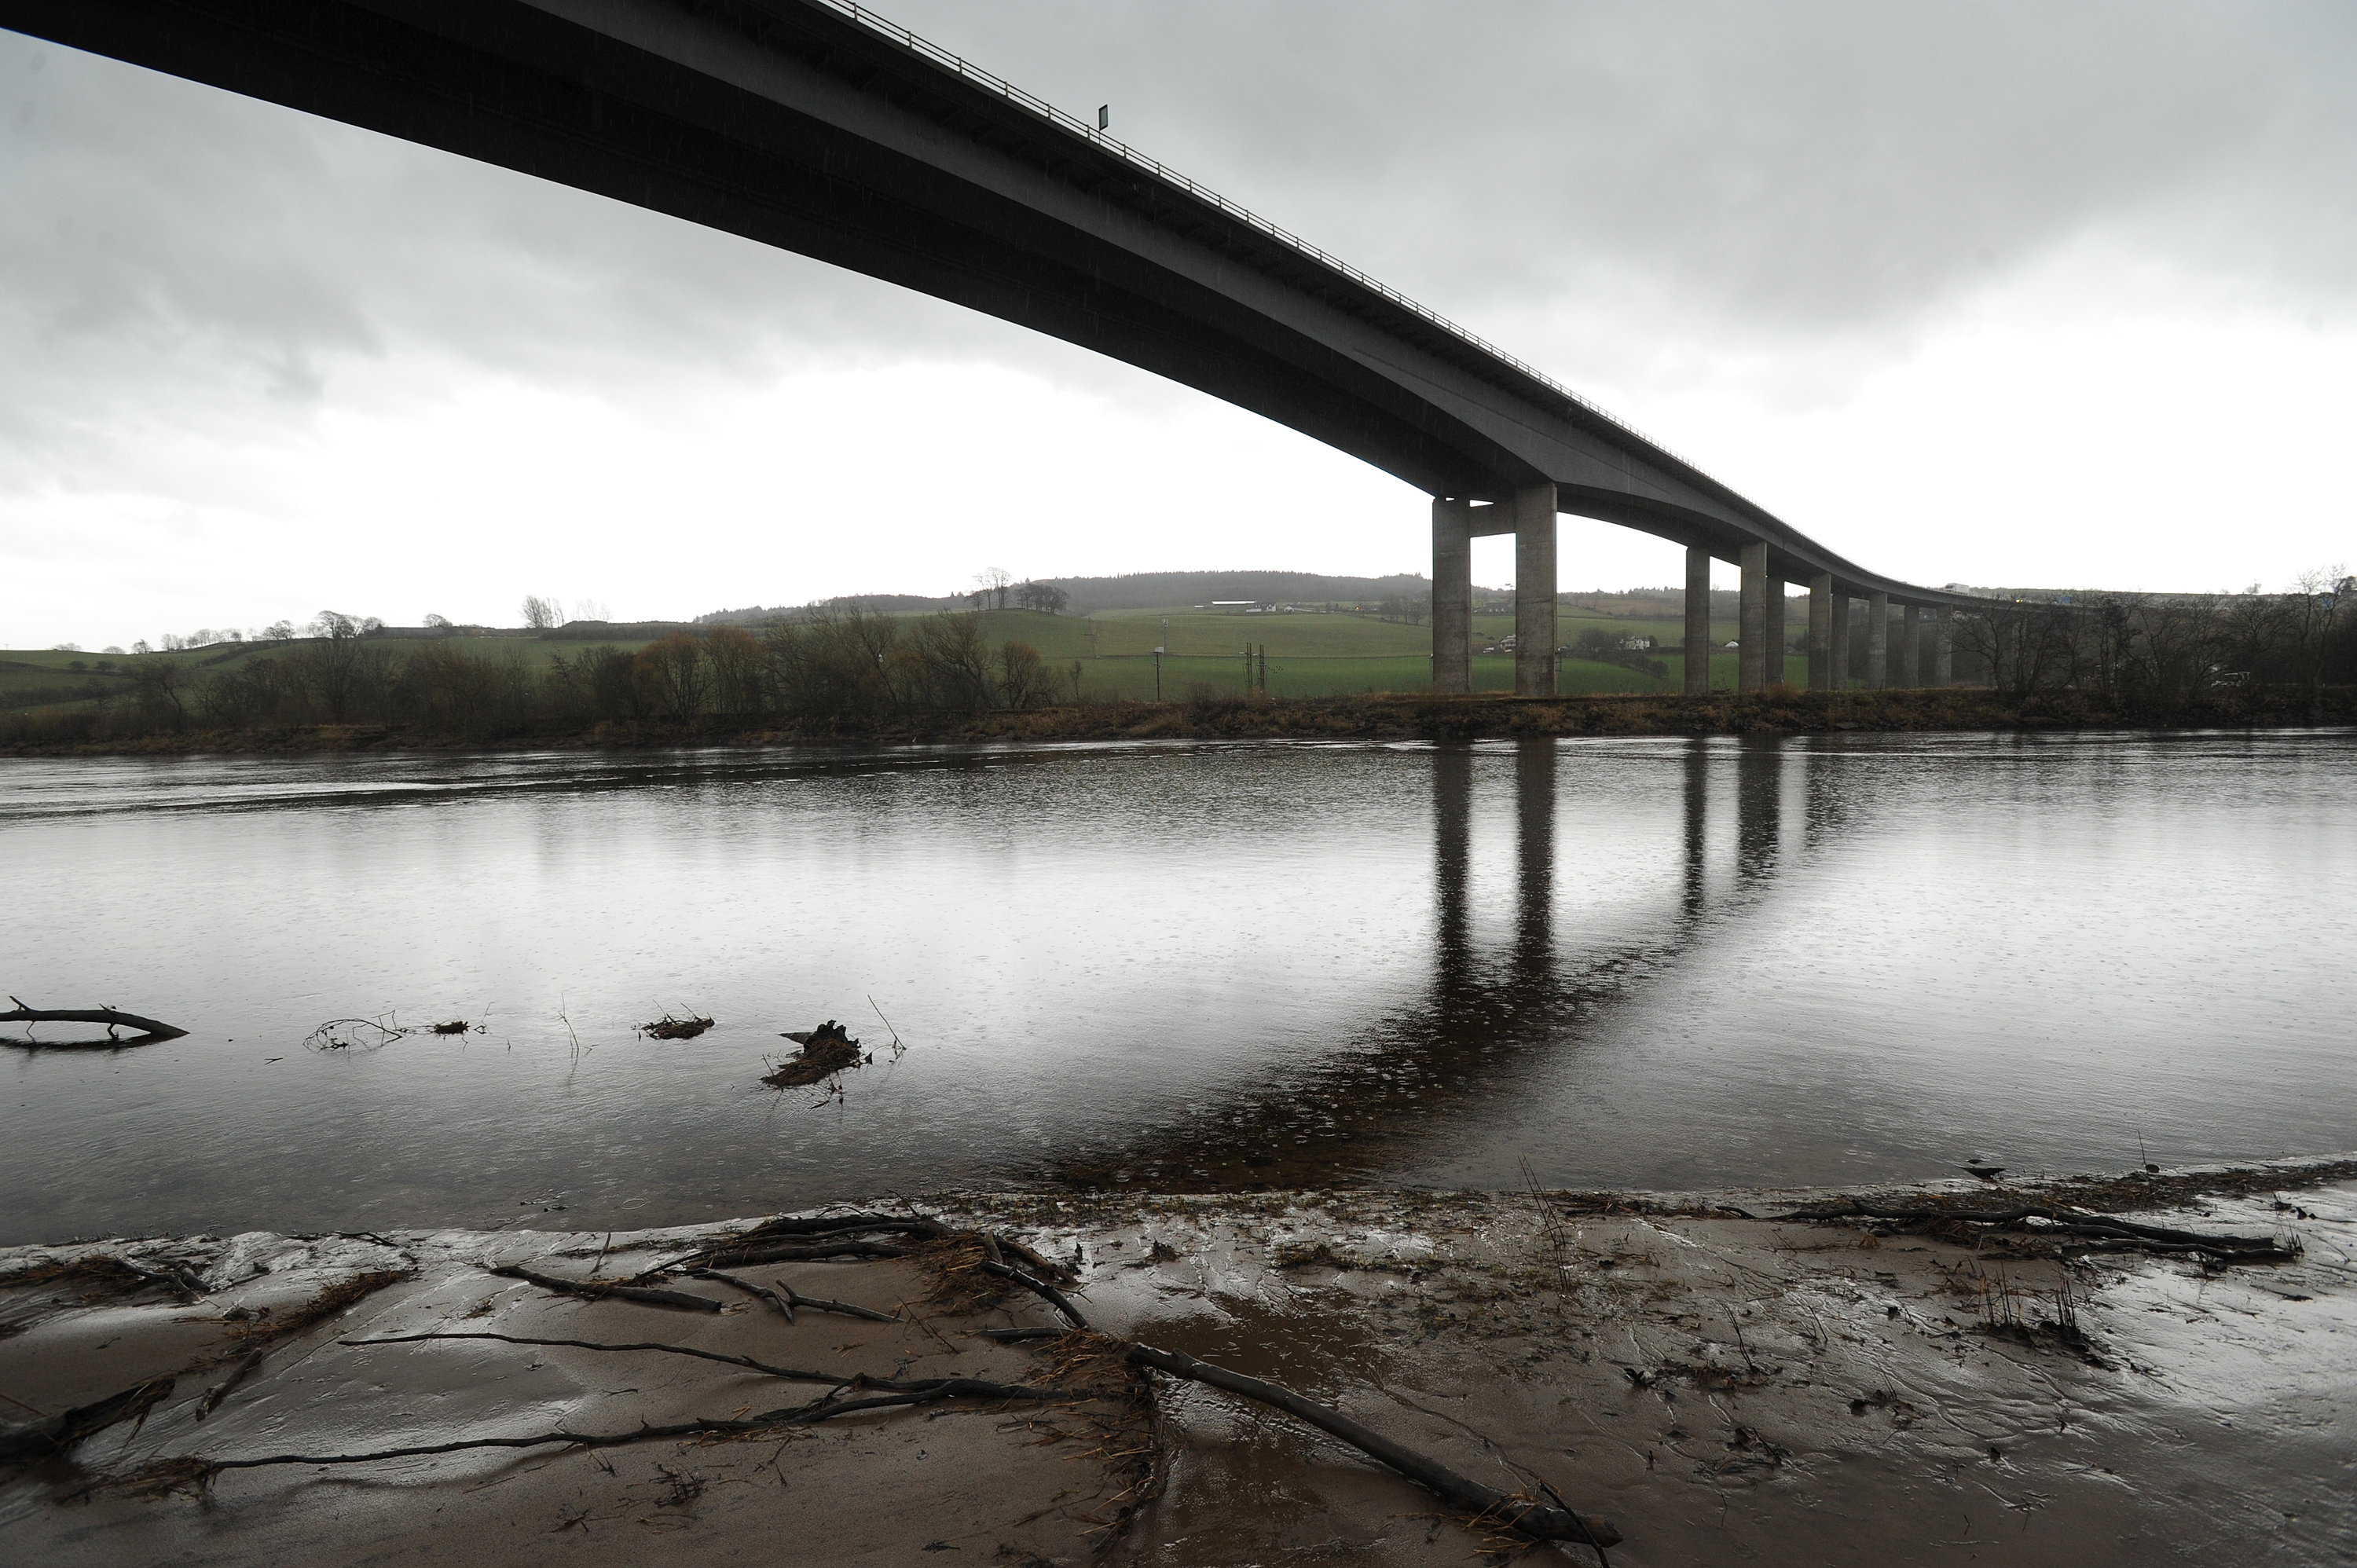 The search is taking place close to Perth's Friarton Bridge.